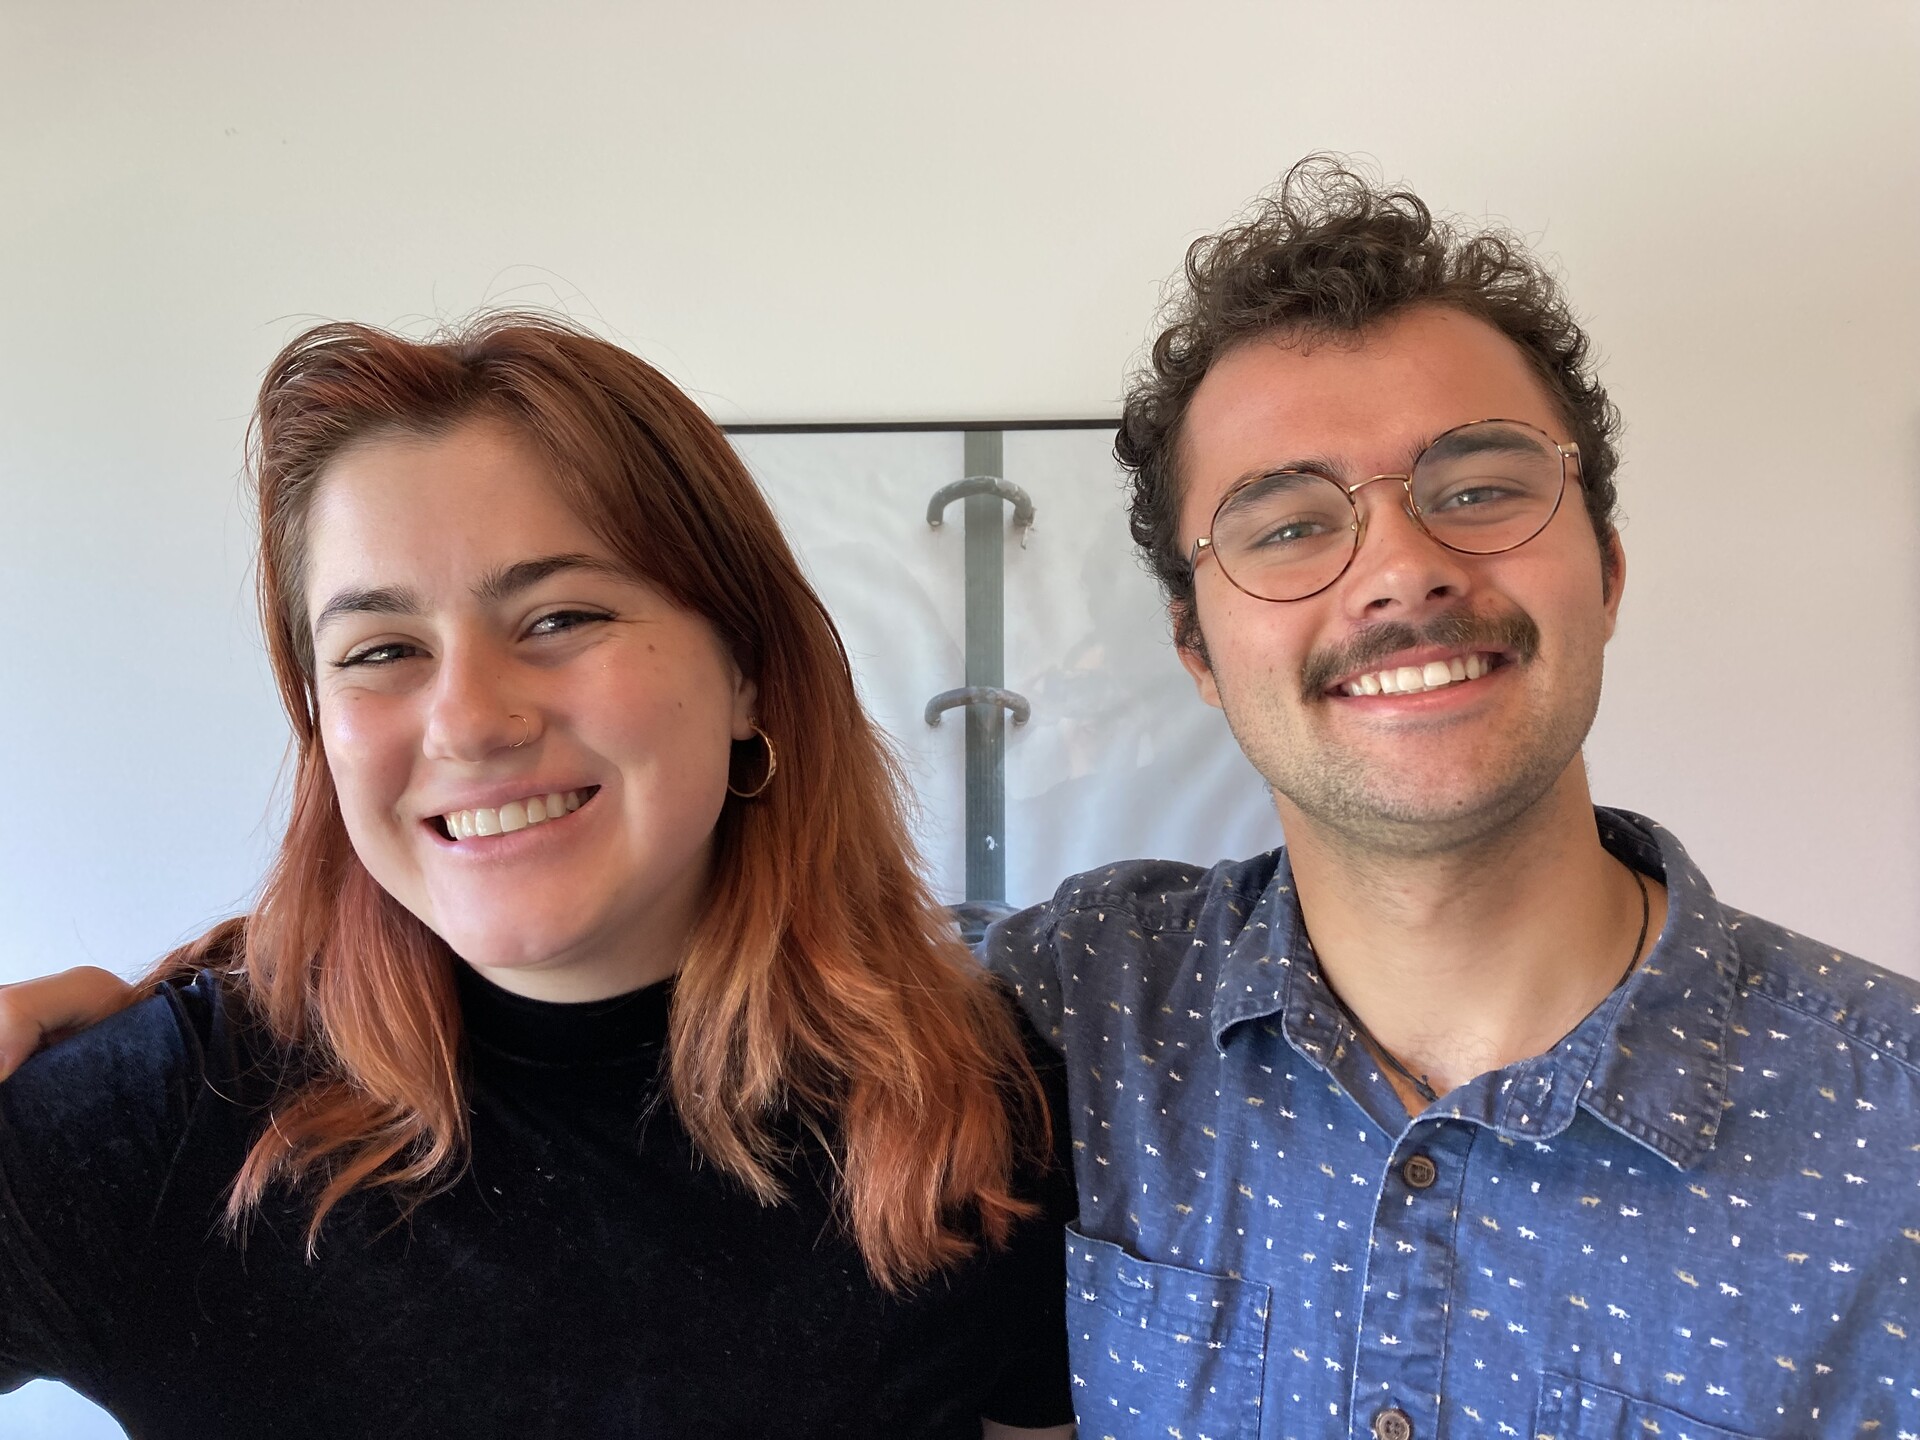 A young white woman in a black turtleneck sweater with long reddish hair smiles shoulder-to-shoulder with a young white man in a blue patterned button-down shirt, mustache and glasses, also smiling, with his right arm around her shoulders. They both look happy.